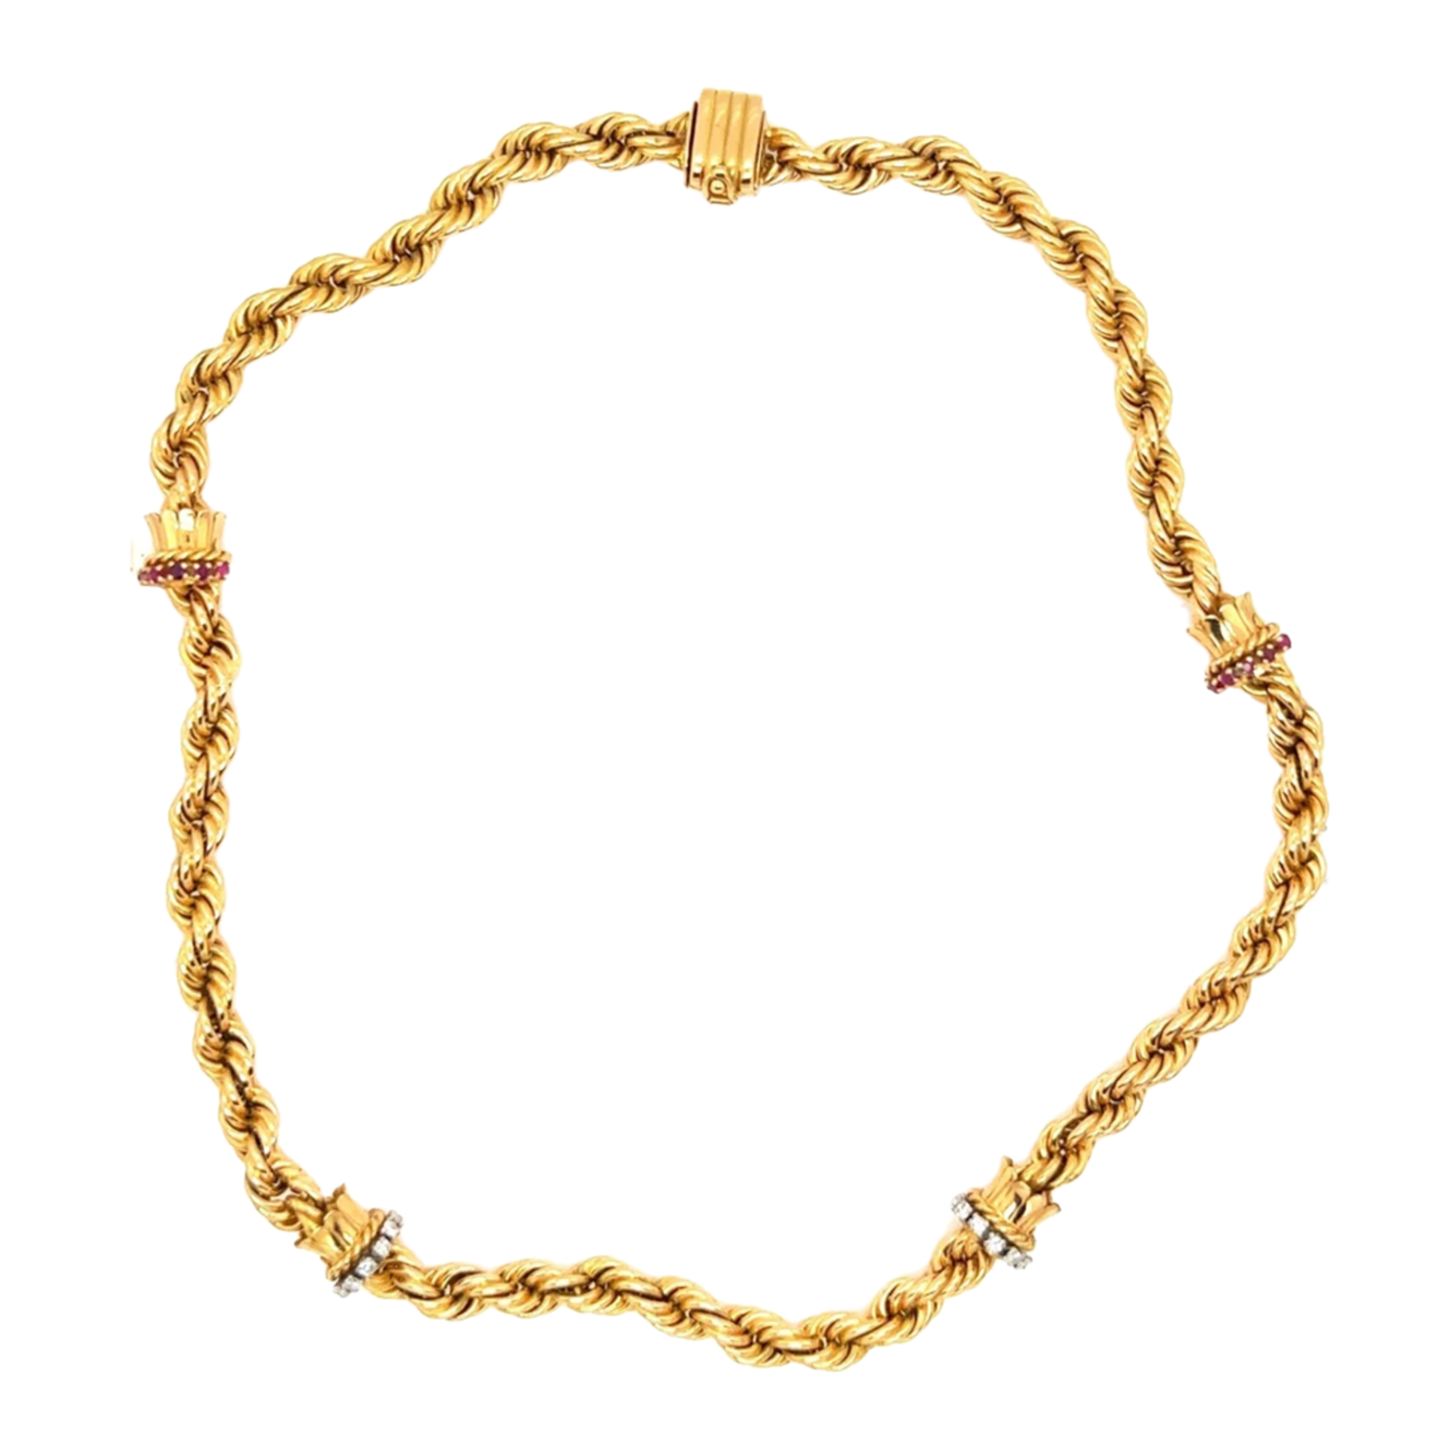 Lacloche Freres Paris 1950s 18KT Yellow Gold Diamond & Ruby Necklace front